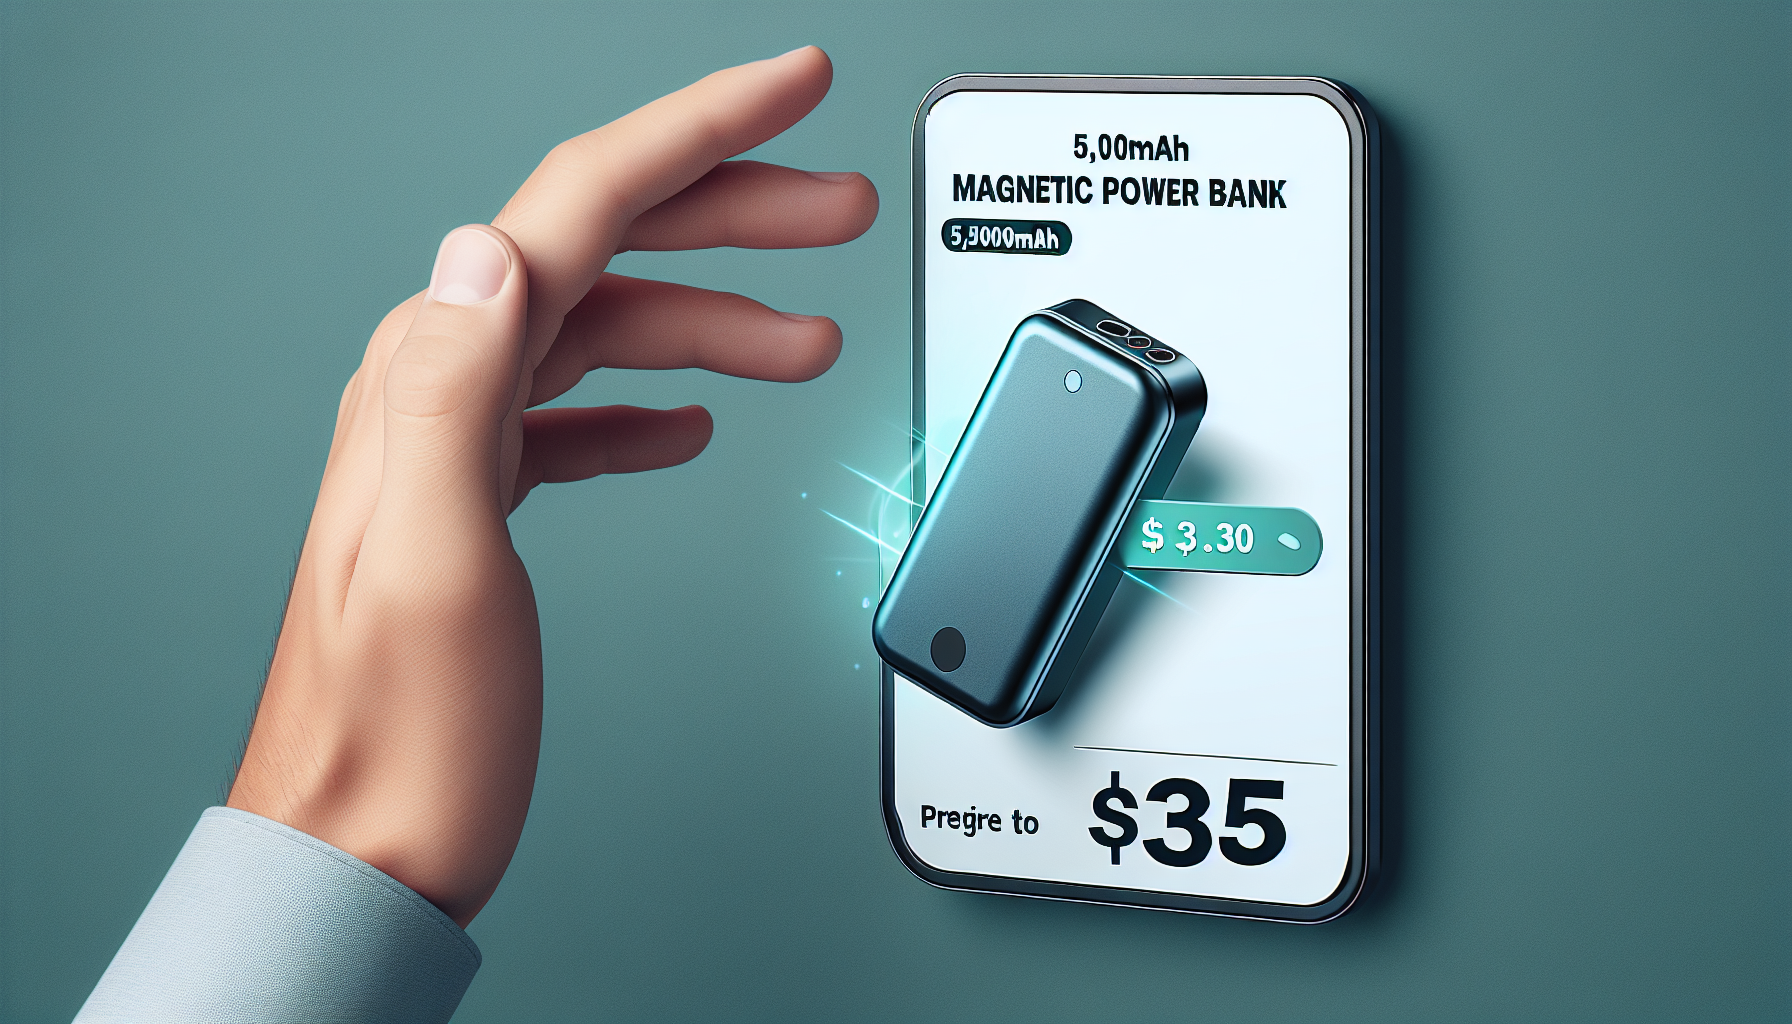 The Anker 5,000mAh MagSafe Power Bank can now be purchased for $35.